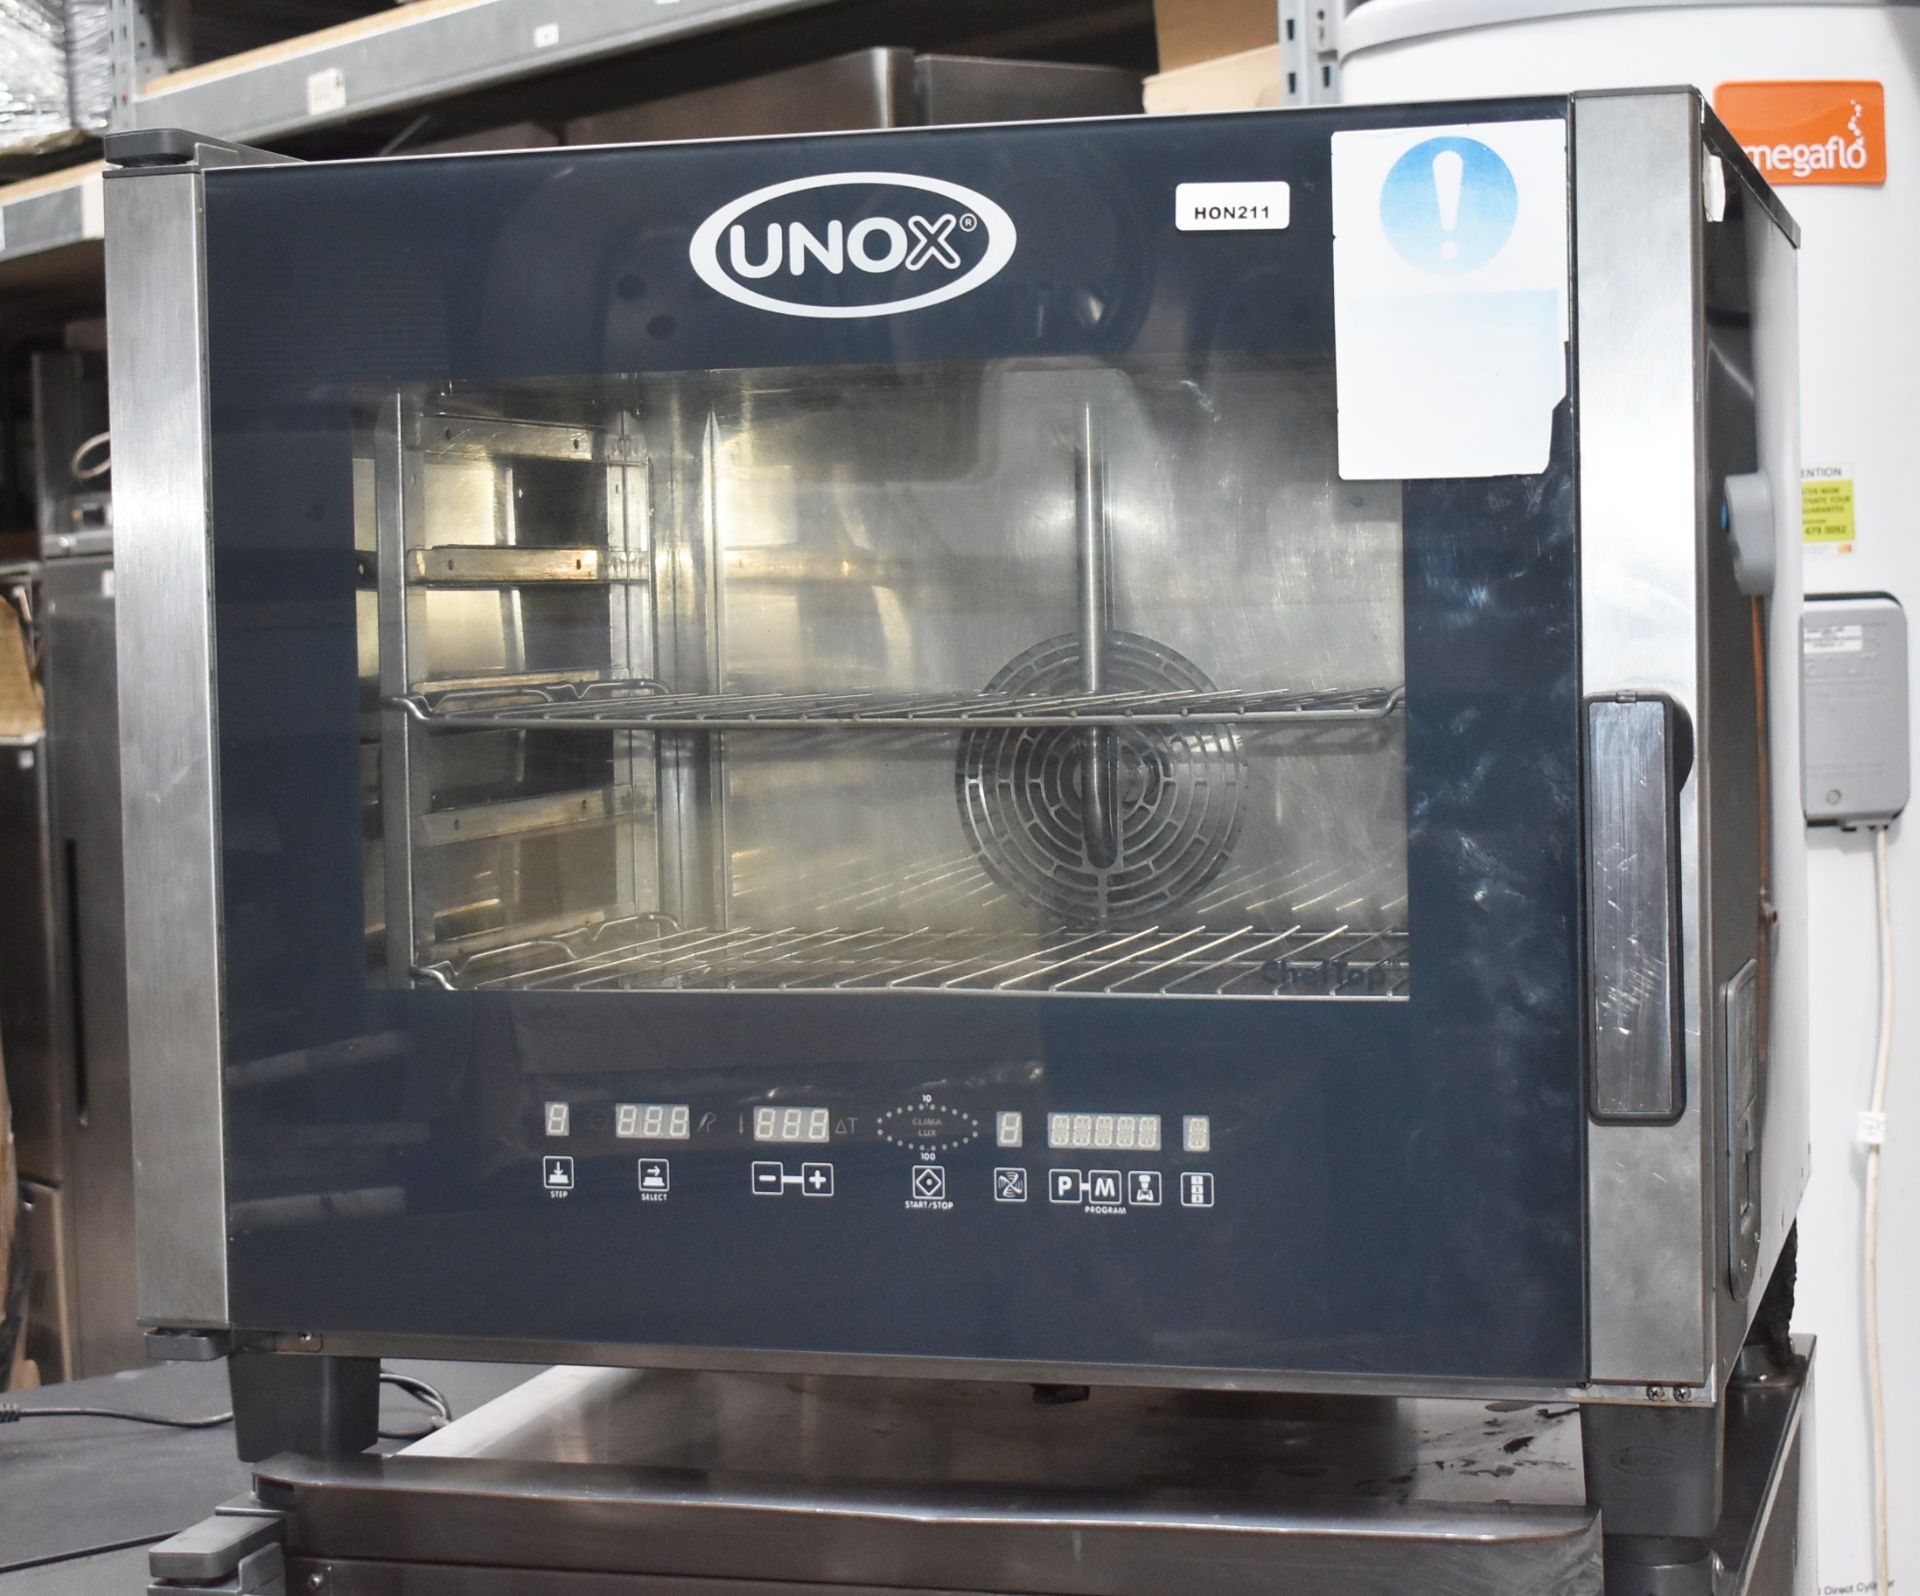 1 x Unox ChefTop XVL385 Commercial 3 Phase Double Oven For Slow Cooking Meats, Proving Dough & More - Image 13 of 26